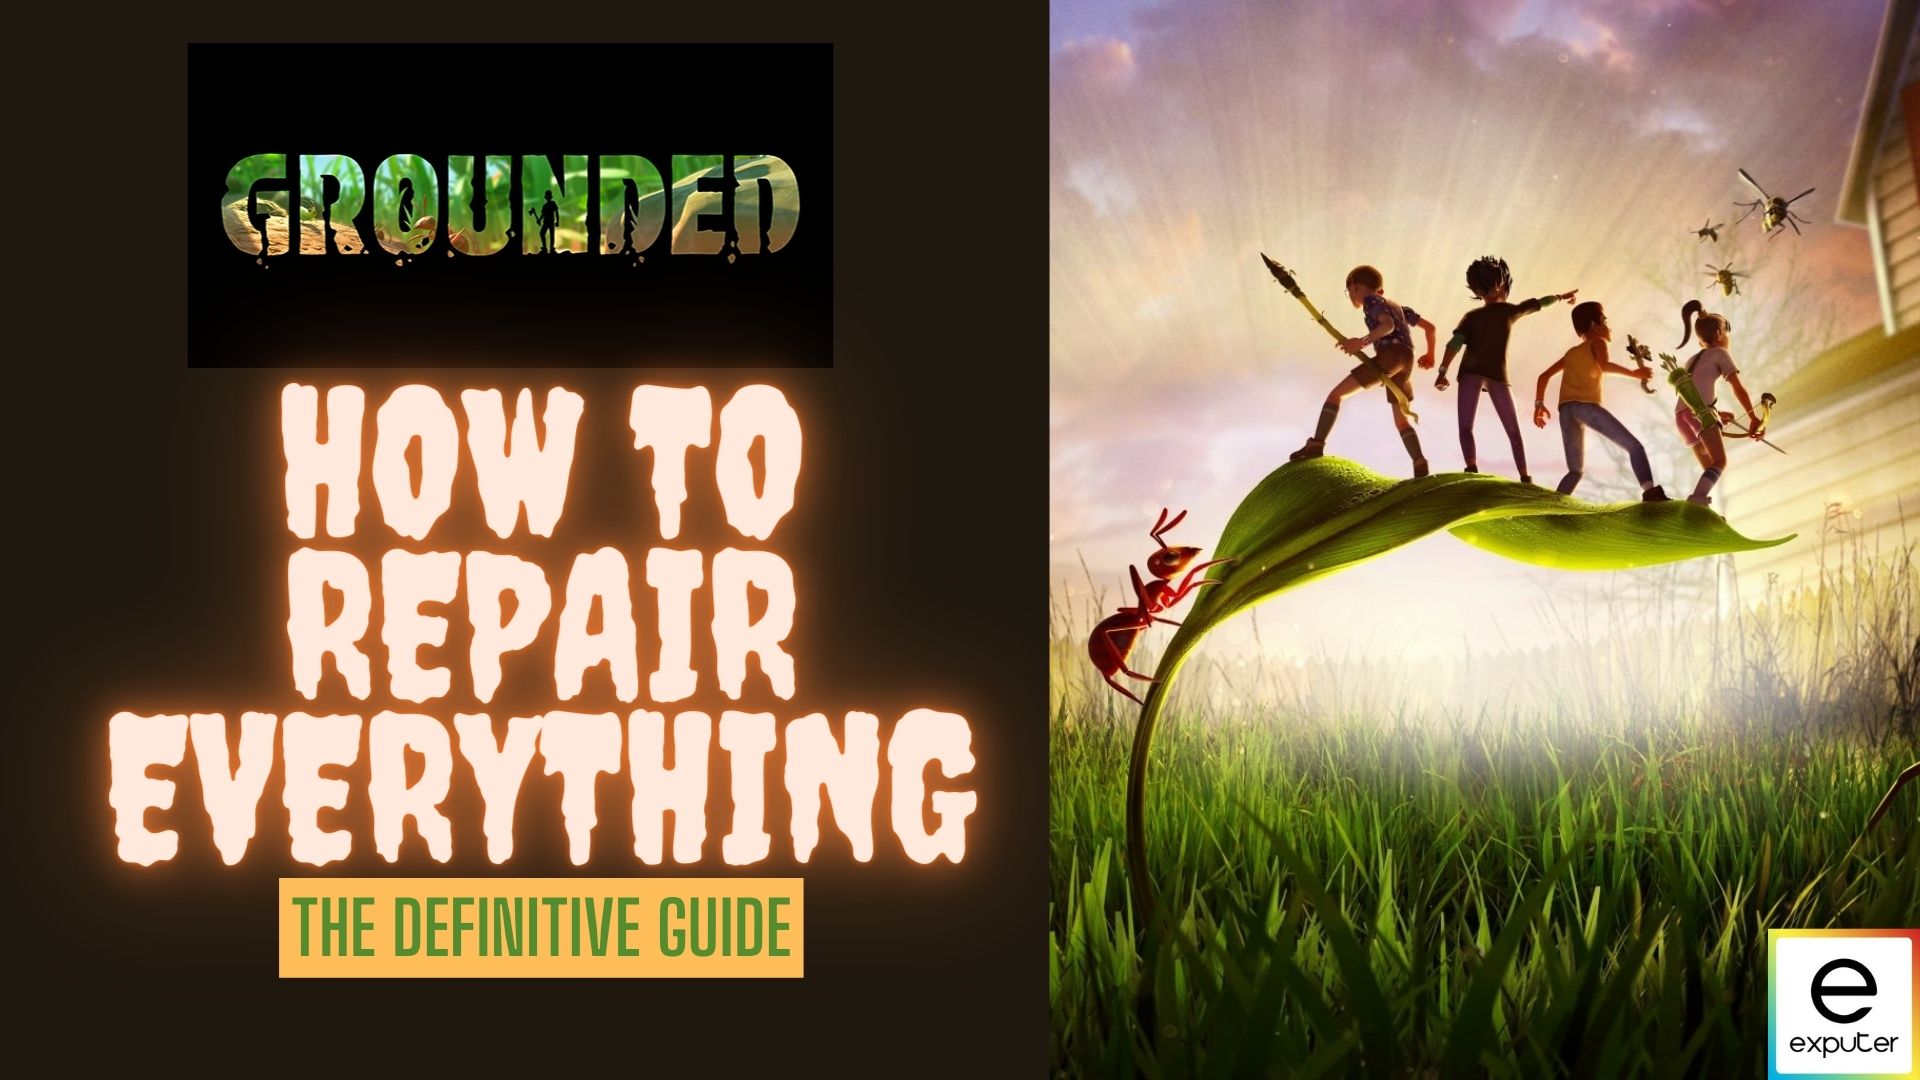 grounded repairing tips and guide